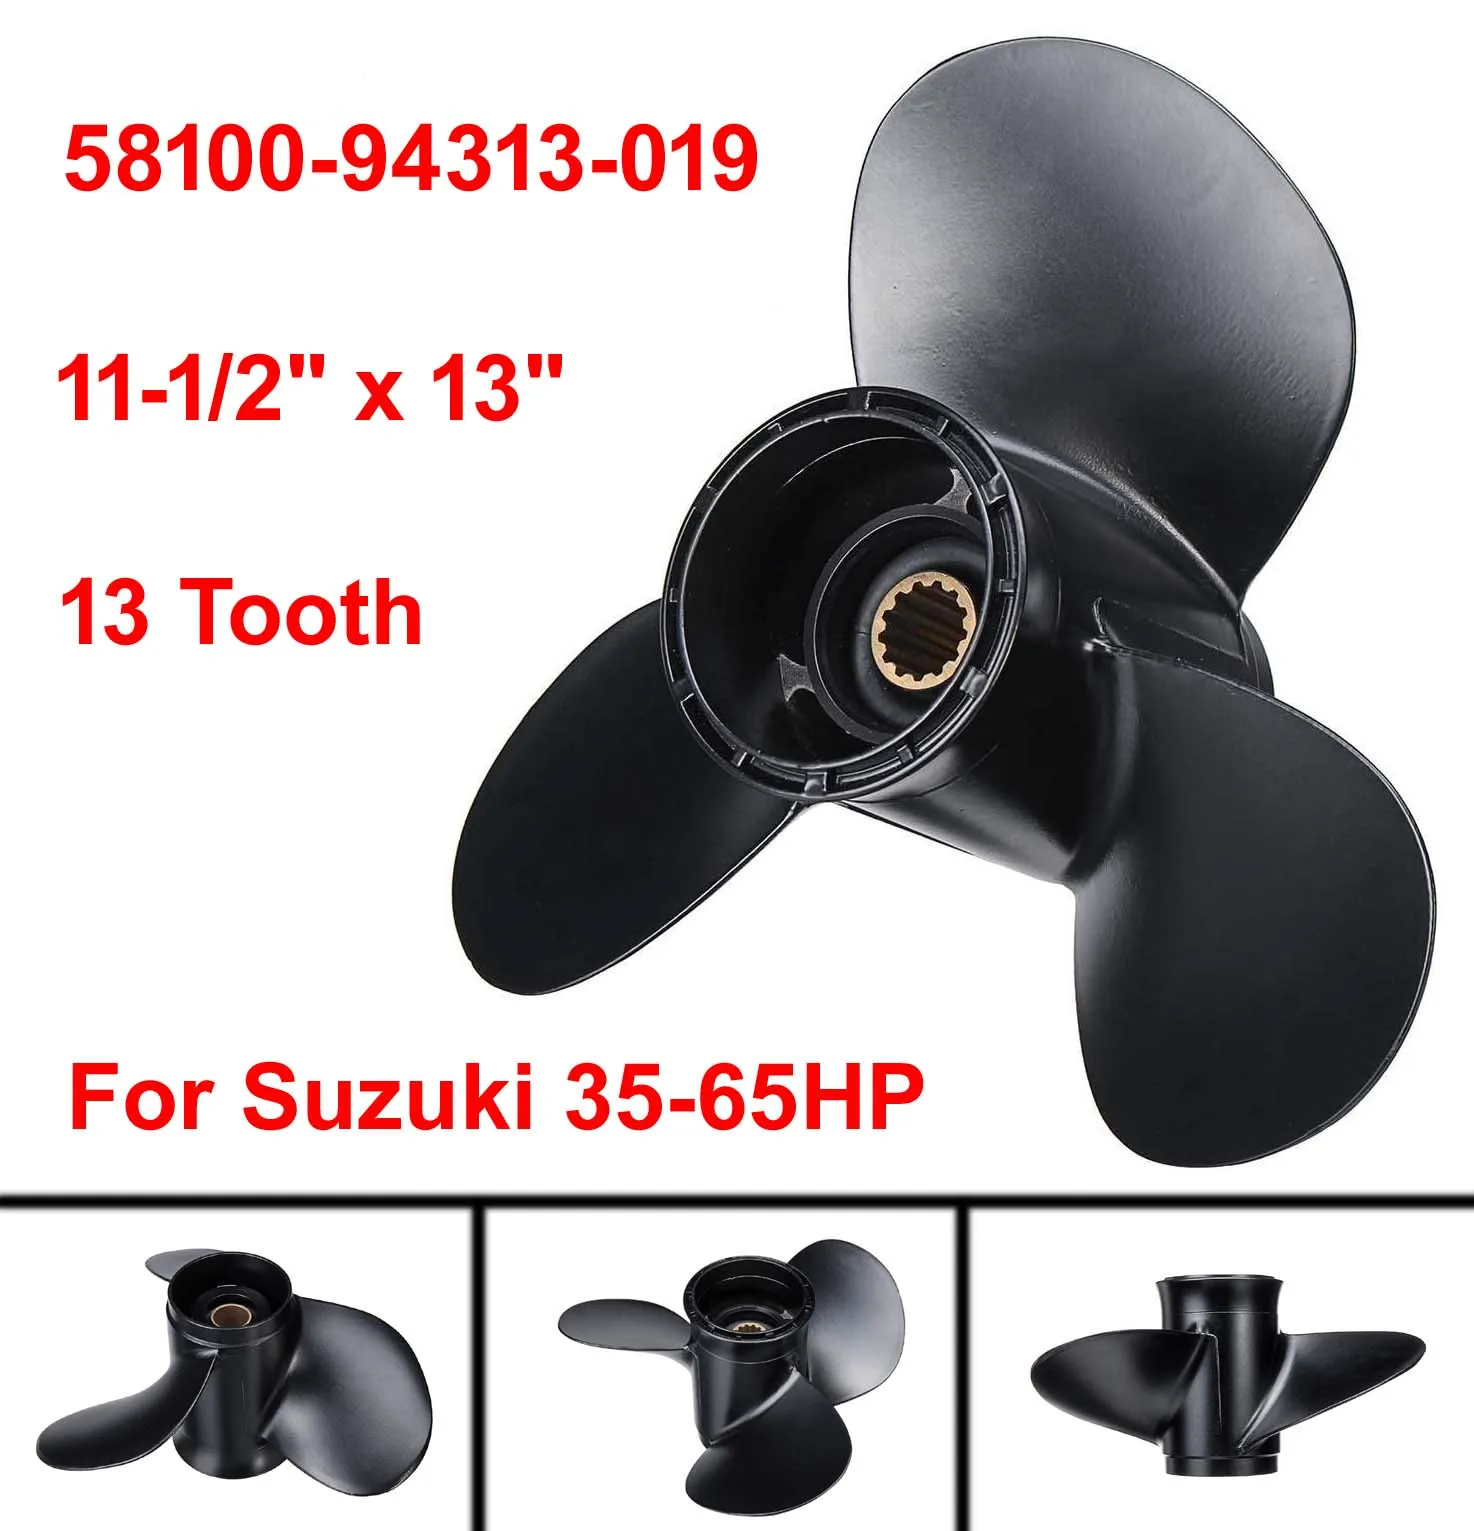 Boat Propeller 11 1/2 X 13 for Suzuki Outboard 35-65HP Motor Engine 13 Tooth Spline Outboard Propellers 58100-94313-019 11.5x13